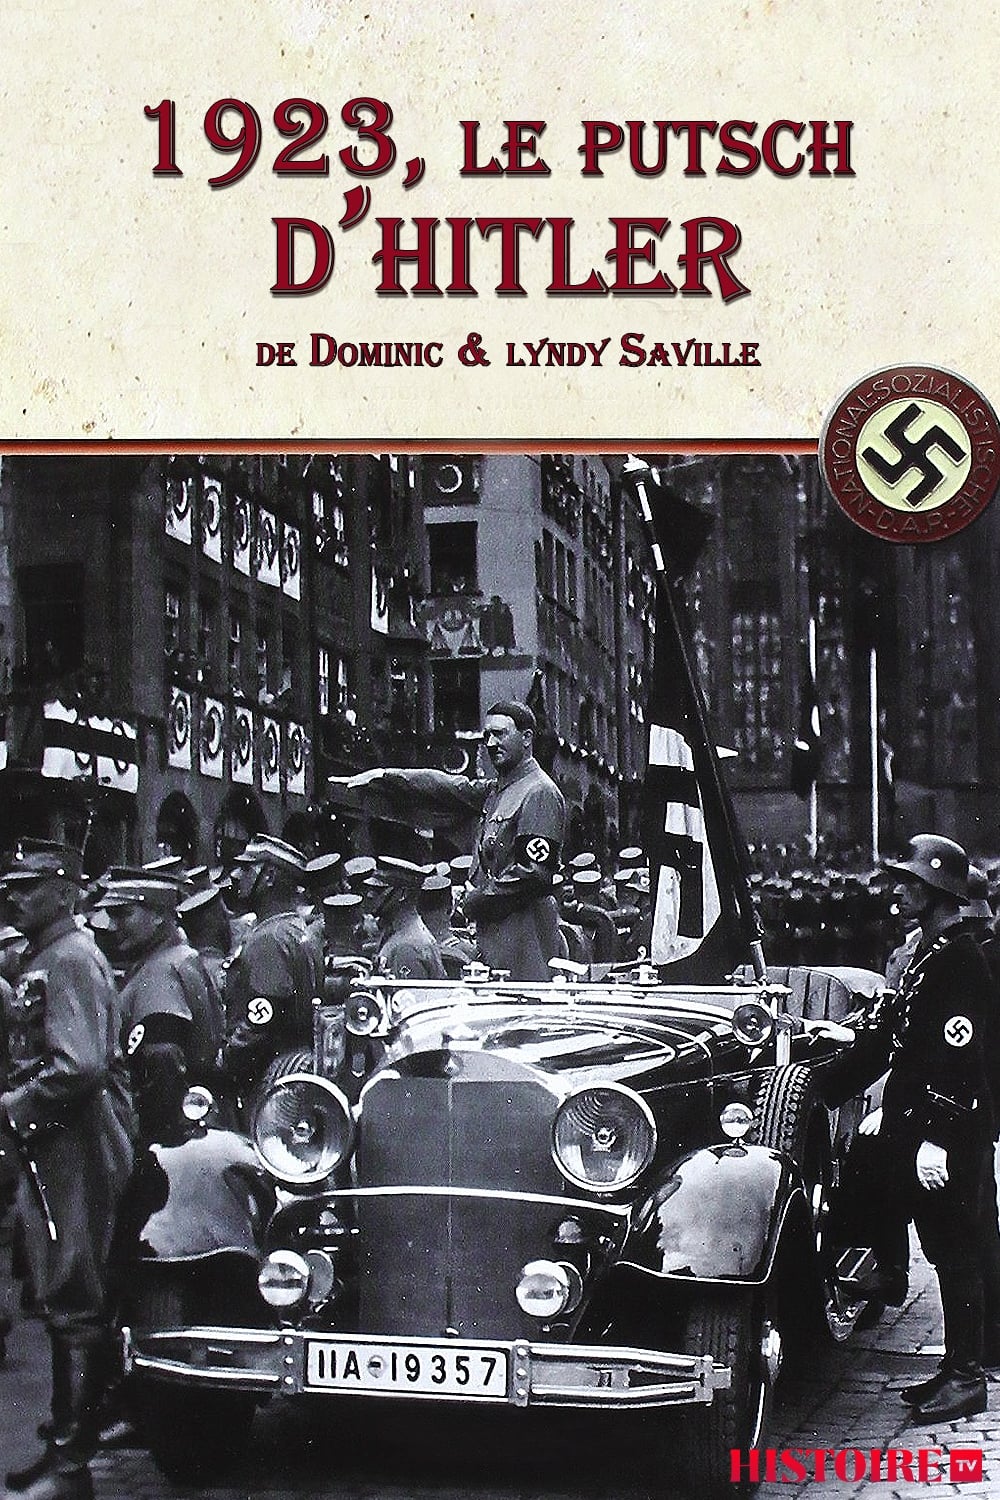 Hitler's Putsch: The Birth of the Nazi Party